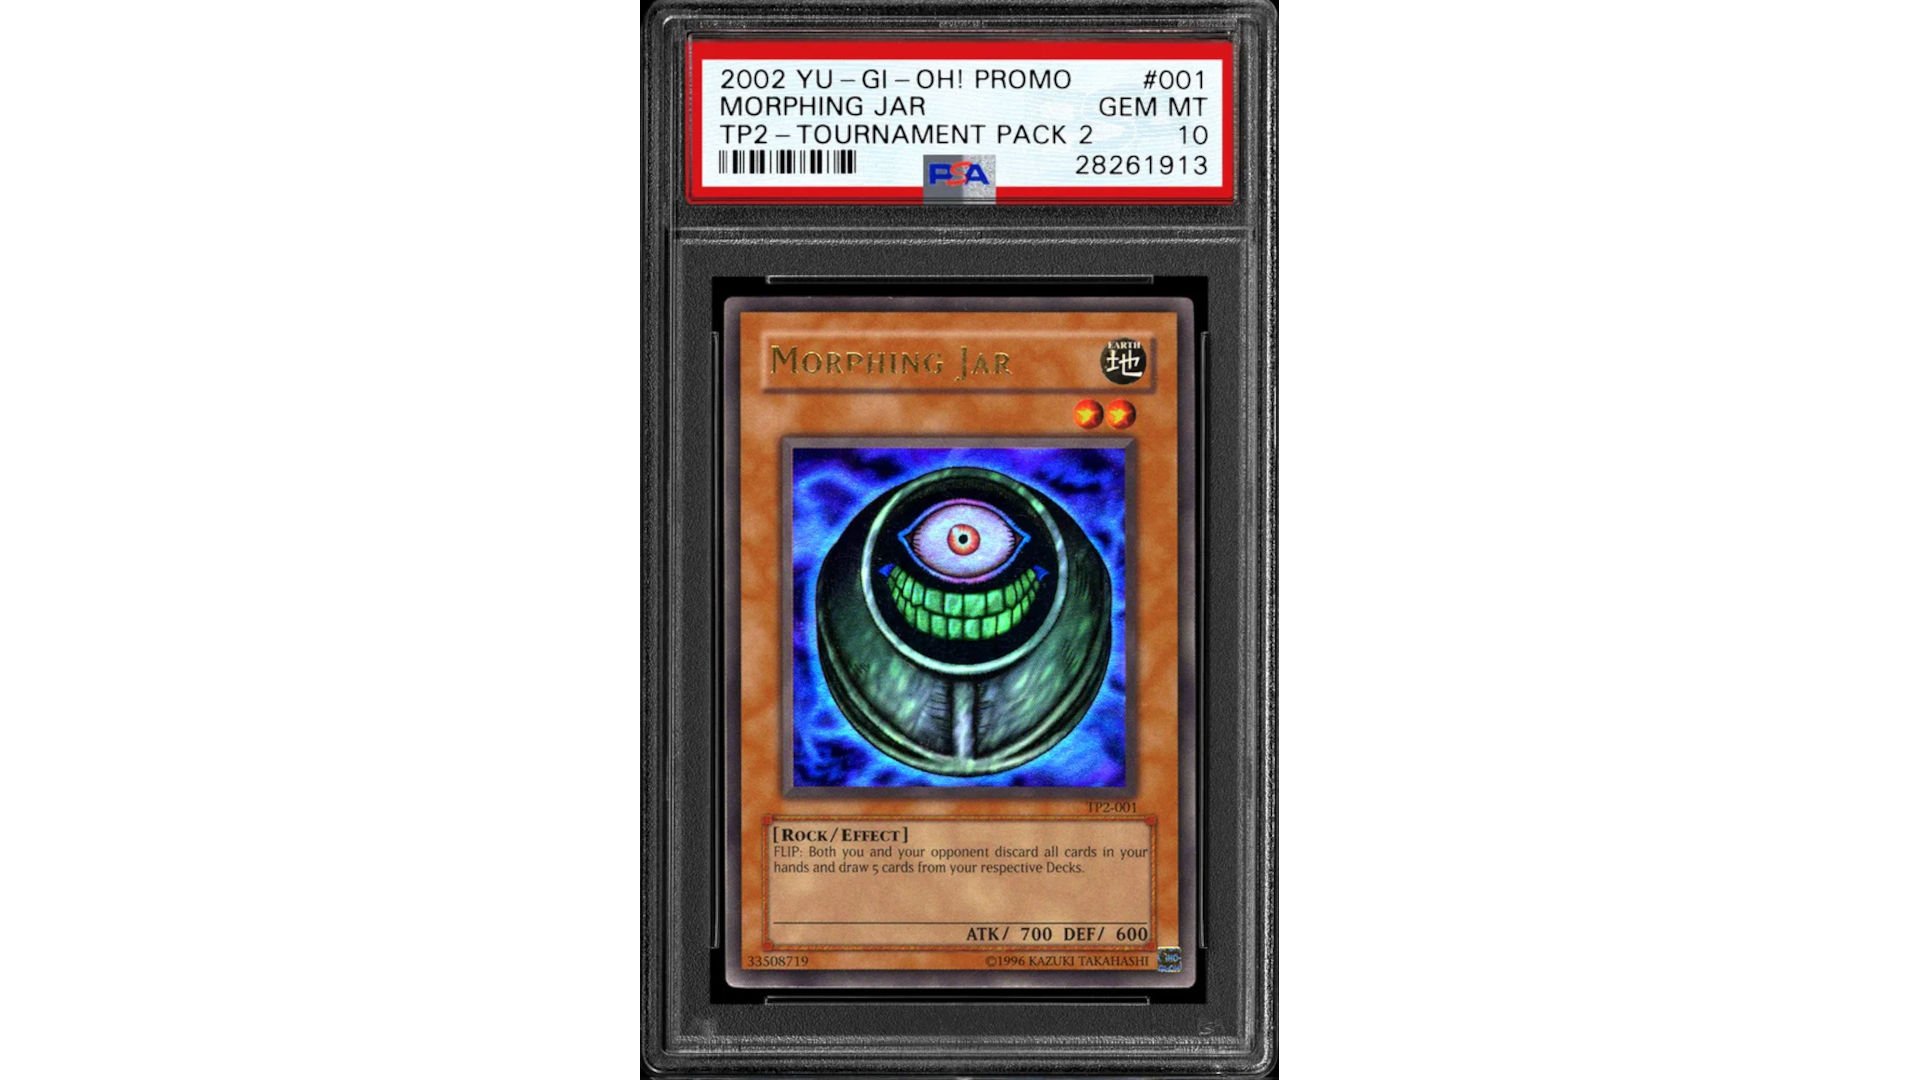 Most expensive yugioh cards - photo of a graded Morphing Jar, a rare YuGiOh card